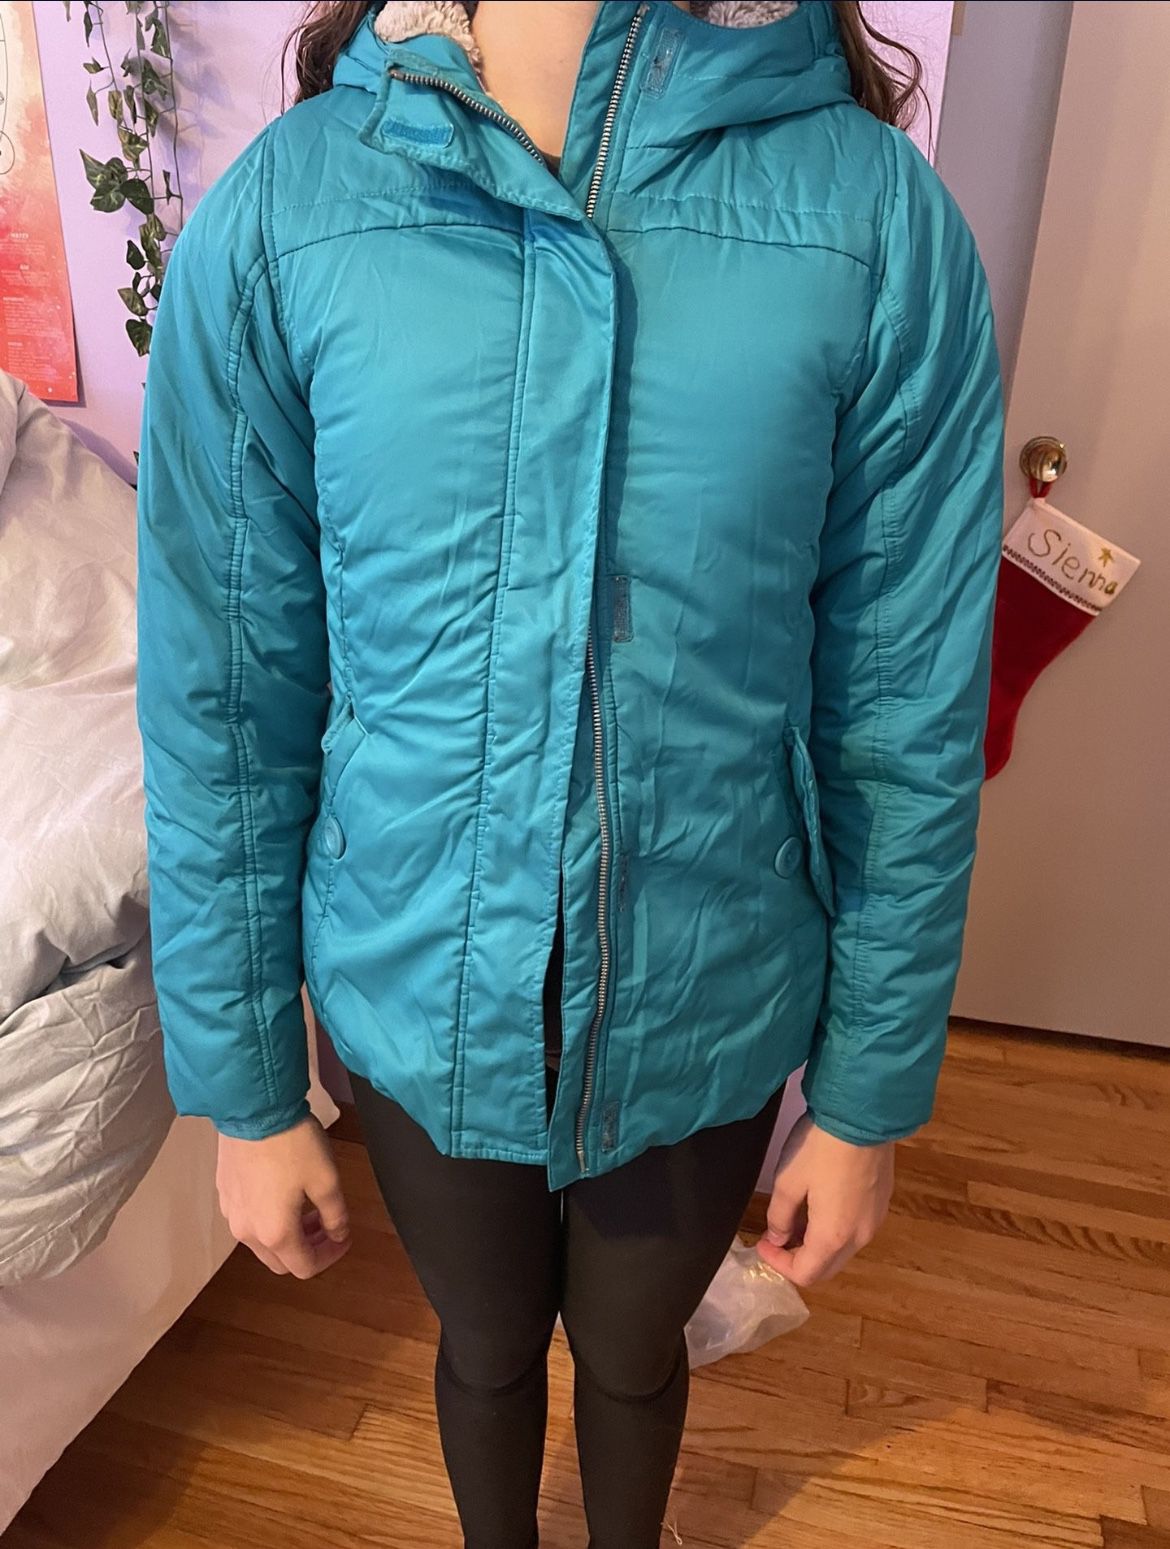 Girls Winter Coat Lands End Size 16 XL 13 - 14 yrs Turquoise 